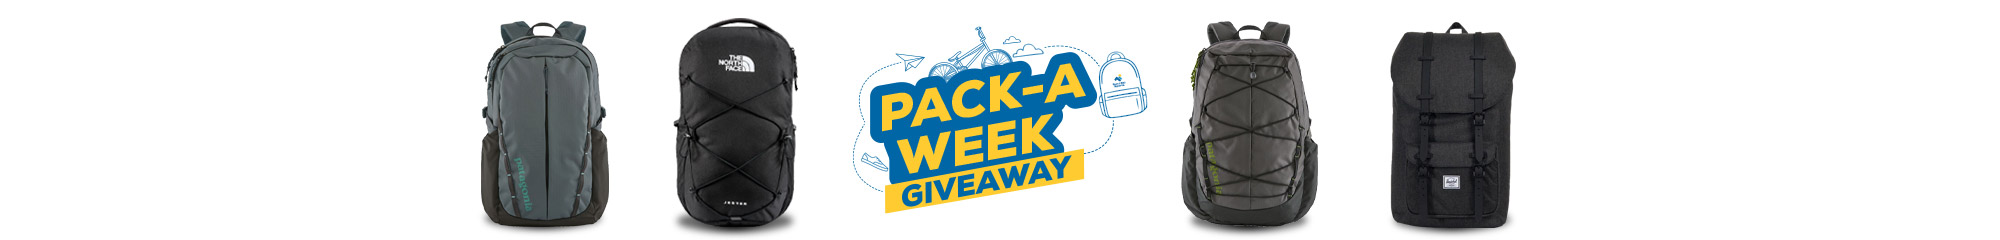 Pack-A-Week Giveaway. August 2nd - August 29th